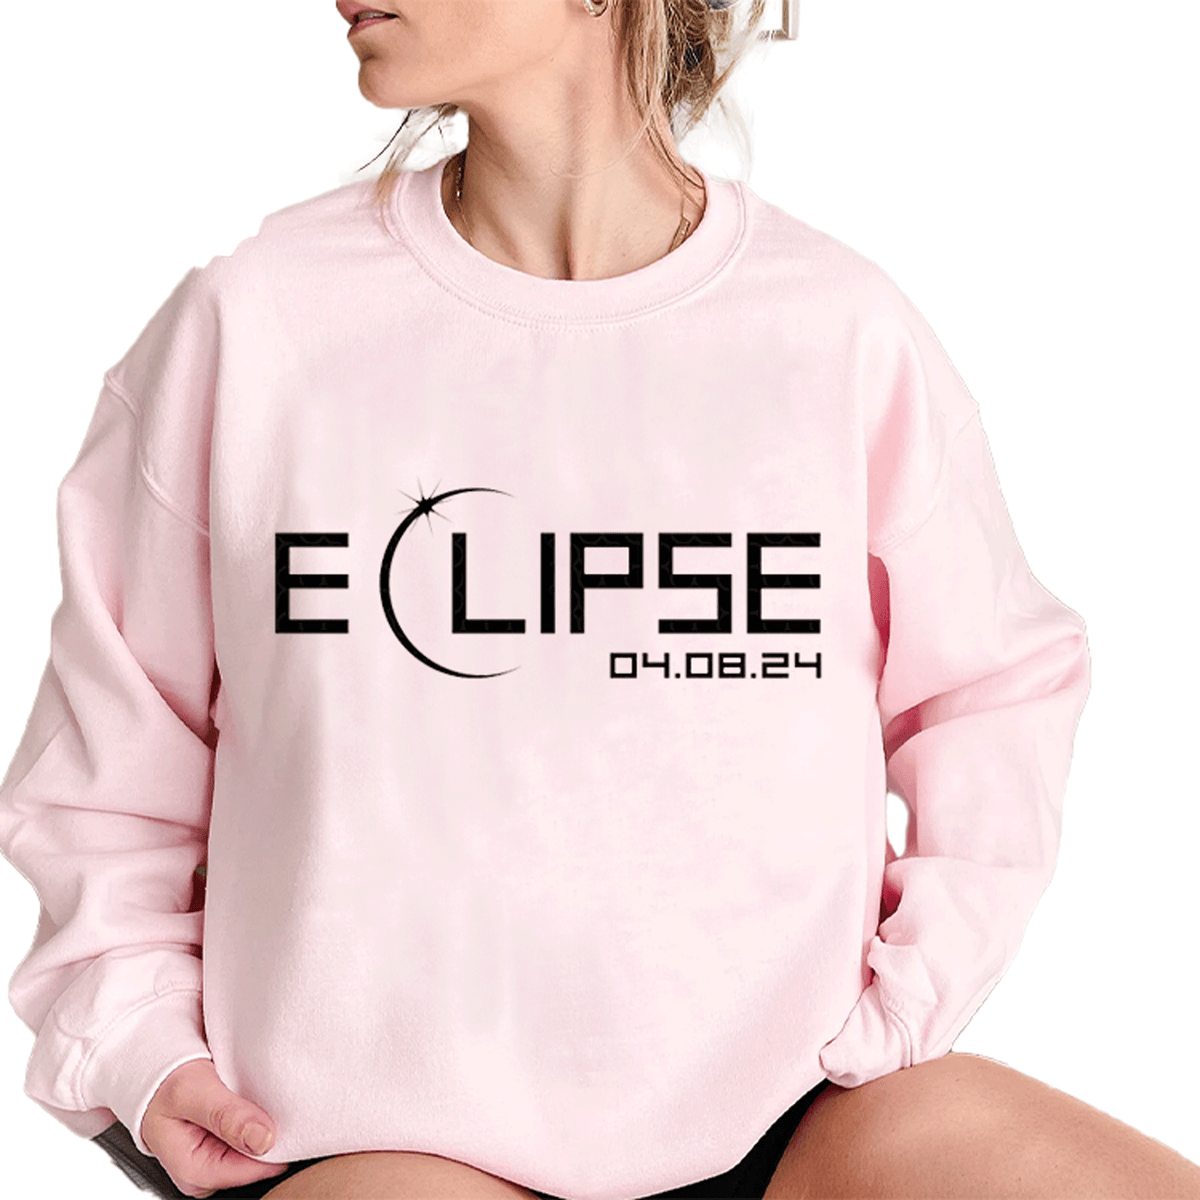 a woman wearing a pink sweatshirt with the word eclipse printed on it